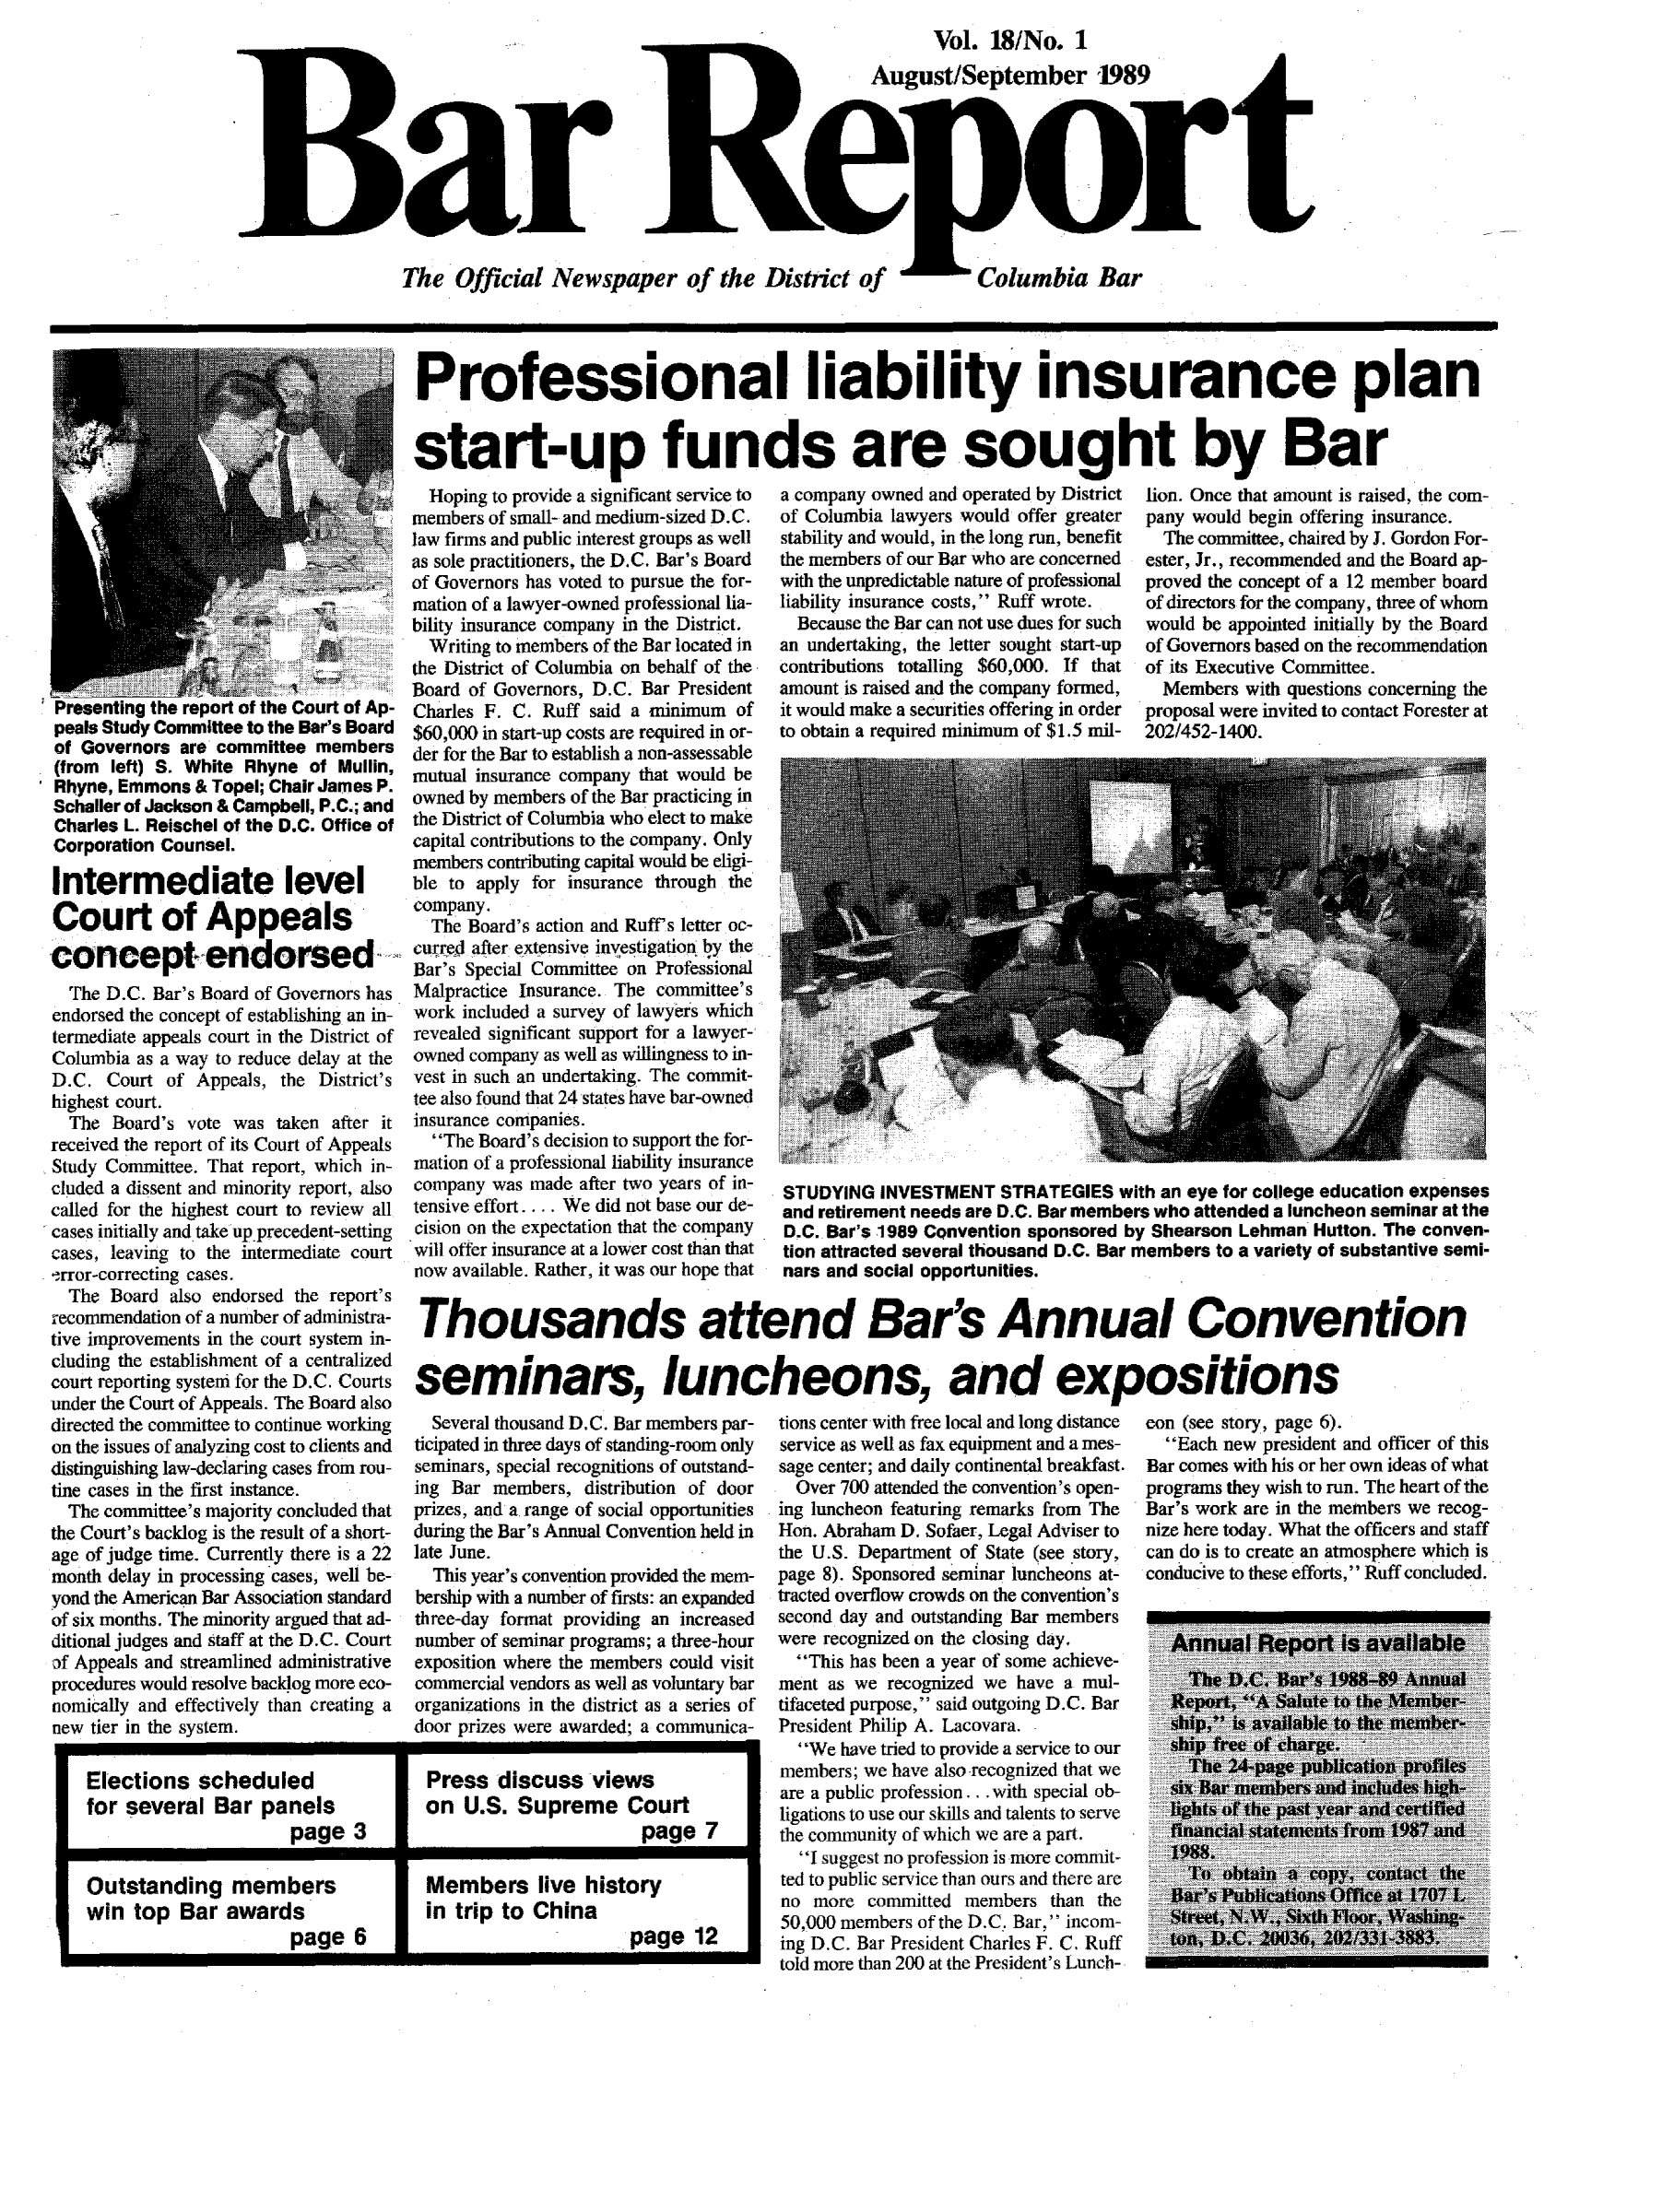 handle is hein.barjournals/breport0019 and id is 1 raw text is: Vol. 18/No. I
B aAugust/September'1989
The Official Newspaper of the Distict of     Columbia Bar

Presenting the report of the Court of Ap-
peals Study Committee to the Bar's Board
of Governors are committee members
(from left) S. White Rhyne of Mullin,
Rhyne, Emmons & Topel; Chair James P.
Schaller of Jackson & Campbell, P.C.; and
Charles L. Reischel of the D.C. Office of
Corporation Counsel.
Intermediate level
Court of Appeals
concept endorsed
The D.C. Bar's Board of Governors has
endorsed the concept of establishing an in-
termediate appeals court in the District of
Columbia as a way to reduce delay at the
D.C. Court of Appeals, the District's
highest court.
The Board's vote was taken after it
received the report of its Court of Appeals
Study Committee. That report, which in-
cluded a dissent and minority report, also
called for the highest court to review all
cases initially and take up precedent-setting
cases, leaving to the intermediate court
-.rror-correcting cases.
The Board also endorsed the report's
recommendation of a number of administra-
tive improvements in the court system in-
cluding the establishment of a centralized
court reporting system for the D.C. Courts
under the Court of Appeals. The Board also
directed the committee to continue working
on the issues of analyzing cost to clients and
distinguishing law-declaring cases from rou-
tine cases in the first instance.
The committee's majority concluded that
the Court's backlog is the result of a short-
age of judge time. Currently there is a 22
month delay in processing cases, well be-
yond the American Bar Association standard
of six months. The minority argued that ad-
ditional judges and staff at the D.C. Court
of Appeals and streamlined administrative
procedures would resolve backlog more eco-
nomically and effectively than creating a
new tier in the system.

Professional lia bility insurance plan
start-up funds are sought by Bar
Hoping to provide a significant service to  a company owned and operated by District  lion. Once that amount is raised, the corn
members of small- and medium-sized D.C.  of Columbia lawyers would offer greater  pany would begin offering insurance.
law firms and public interest groups as well  stability and would, in the long run, benefit  The committee, chaired by J. Gordon For-
as sole practitioners, the D.C. Bar's Board  the members of our Bar who are concerned  ester, Jr., recommended and the Board ap-
of Governors has voted to pursue the for-  with the unpredictable nature of professional  proved the concept of a 12 member board
mation of a lawyer-owned professional lia-  liability insurance costs, Ruff wrote.  of directors for the company, three of whom
bility insurance company in the District.  Because the Bar can not use dues for such  would he appointed initially by the.Board
Writing to members of the Bar located in  an undertaking, the letter sought start-up  of Governors based on the recommendation
the District of Columbia on behalf of the  contributions totalling $60,000. If that  of its Executive Committee.
Board of Governors, D.C. Bar President  amount is raised and the company formed,  Members with questions concerning the
Charles F. C. Ruff said a minimum of   it would make a securities offering in order  proposal were invited to contact Forester at
$60,000 in start-up costs are required in or-  to obtain a required minimum of $1.5 mi-  202/452-1400.
der for the Bar to establish a non-assessable
mutual insurance company that would be
owned by members of the Bar practicing in
the District of Columbia who elect to make
capital contributions to the company. Only
members contributing capital would be eligi
ble to apply for insurance through the
company.
The Board's action and Ruff's letter oc-
curred after extensive investigatiotn by the
Bar's Special Committee on Professional
Malpractice Insurance. The committee's
work included a survey of lawyers which
revealed significant support for a lawyer-
owned company as well as willingness to in-
vest in such an undertaking. The commit-
tee also found that 24 states have bar-owned
insurance companies.
The Board's decision to support the for-
mation of a professional liability insurance
company was made after two years of i-  STUDYING INVESTMENT STRATEGIES with an eye for college education expenses
tensive effort.... We did not base our de-  and retirement needs are D.C. Bar members who attended a luncheon seminar at the
cision on the expectation that the company  D.C..Bar's 1989 Convention sponsored by Shearson Lehman Hutton. The conven-
will offer insurance at a lower cost than that  tion attracted several thousand D.C. Bar members to a variety of substantive semi-
now available. Rather, it was our hope that  nars and social opportunities.
Thousands attend Bar's Annual Convention
seminars,elun                                 bes, and expositions

Several thousand D.C. Bar members par-
ticipated in three days of standing-room only
seminars, special recognitions of outstand-
ing Bar members, distribution of door
prizes, and a range of social opportunities
during the Bar's Annual Convention held in
late June.
This year's convention provided the mem-
bership with a number of firsts: an expanded
three-day format providing an increased
number of seminar programs; a three-hour
exposition where the members could visit
commercial vendors as well as voluntary bar
organizations in the district as a series of
door prizes were awarded; a communica-

tions center with free local and long distance
service as well as fax equipment and a mes-
sage center; and daily continental breakfast.
Over 700 attended the convention's open-
ing luncheon featuring remarks from The
Hon. Abraham D. Sofaer, Legal Adviser to
the U.S. Department of State (see story,
page 8). Sponsored seminar luncheons at-
tracted overflow crowds on the convention's
second day and outstanding Bar members
were recognized on the closing day.
This has been a year of some achieve-
ment as we recognized we have a mul-
tifaceted purpose, said outgoing D.C. Bar
President Philip A. Lacovara.
We have tried to provide a service to our
members; we have also recognized that we
are a public profession ... with special ob-
ligations to use our skills and talents to serve
the comnunity of which we are a part.
I suggest no profession is more commit-
ted to public service than ours and there are
no more committed members than the
50,000 members of the D.C. Bar,  incom-
ing D.C. Bar President Charles F. C. Ruff
told more than 200 at the President's Lunch-

con (see story, page 6).
Each new president and officer of this
Bar comes with his or her own ideas of what
programs they wish to run. The heart of the
Bar's work are in the members we recog-
nize here today. What the officers and staff
can do is to create an atmosphere which is
conducive to these efforts,  Ruff concluded.

Elections scheduled      Press discuss views
for several Bar panels   on U.S. Supreme Court
page 3                   page 7
Outstanding members      Members live history
win top Bar awards      in trip to China
page 6                   page 12


